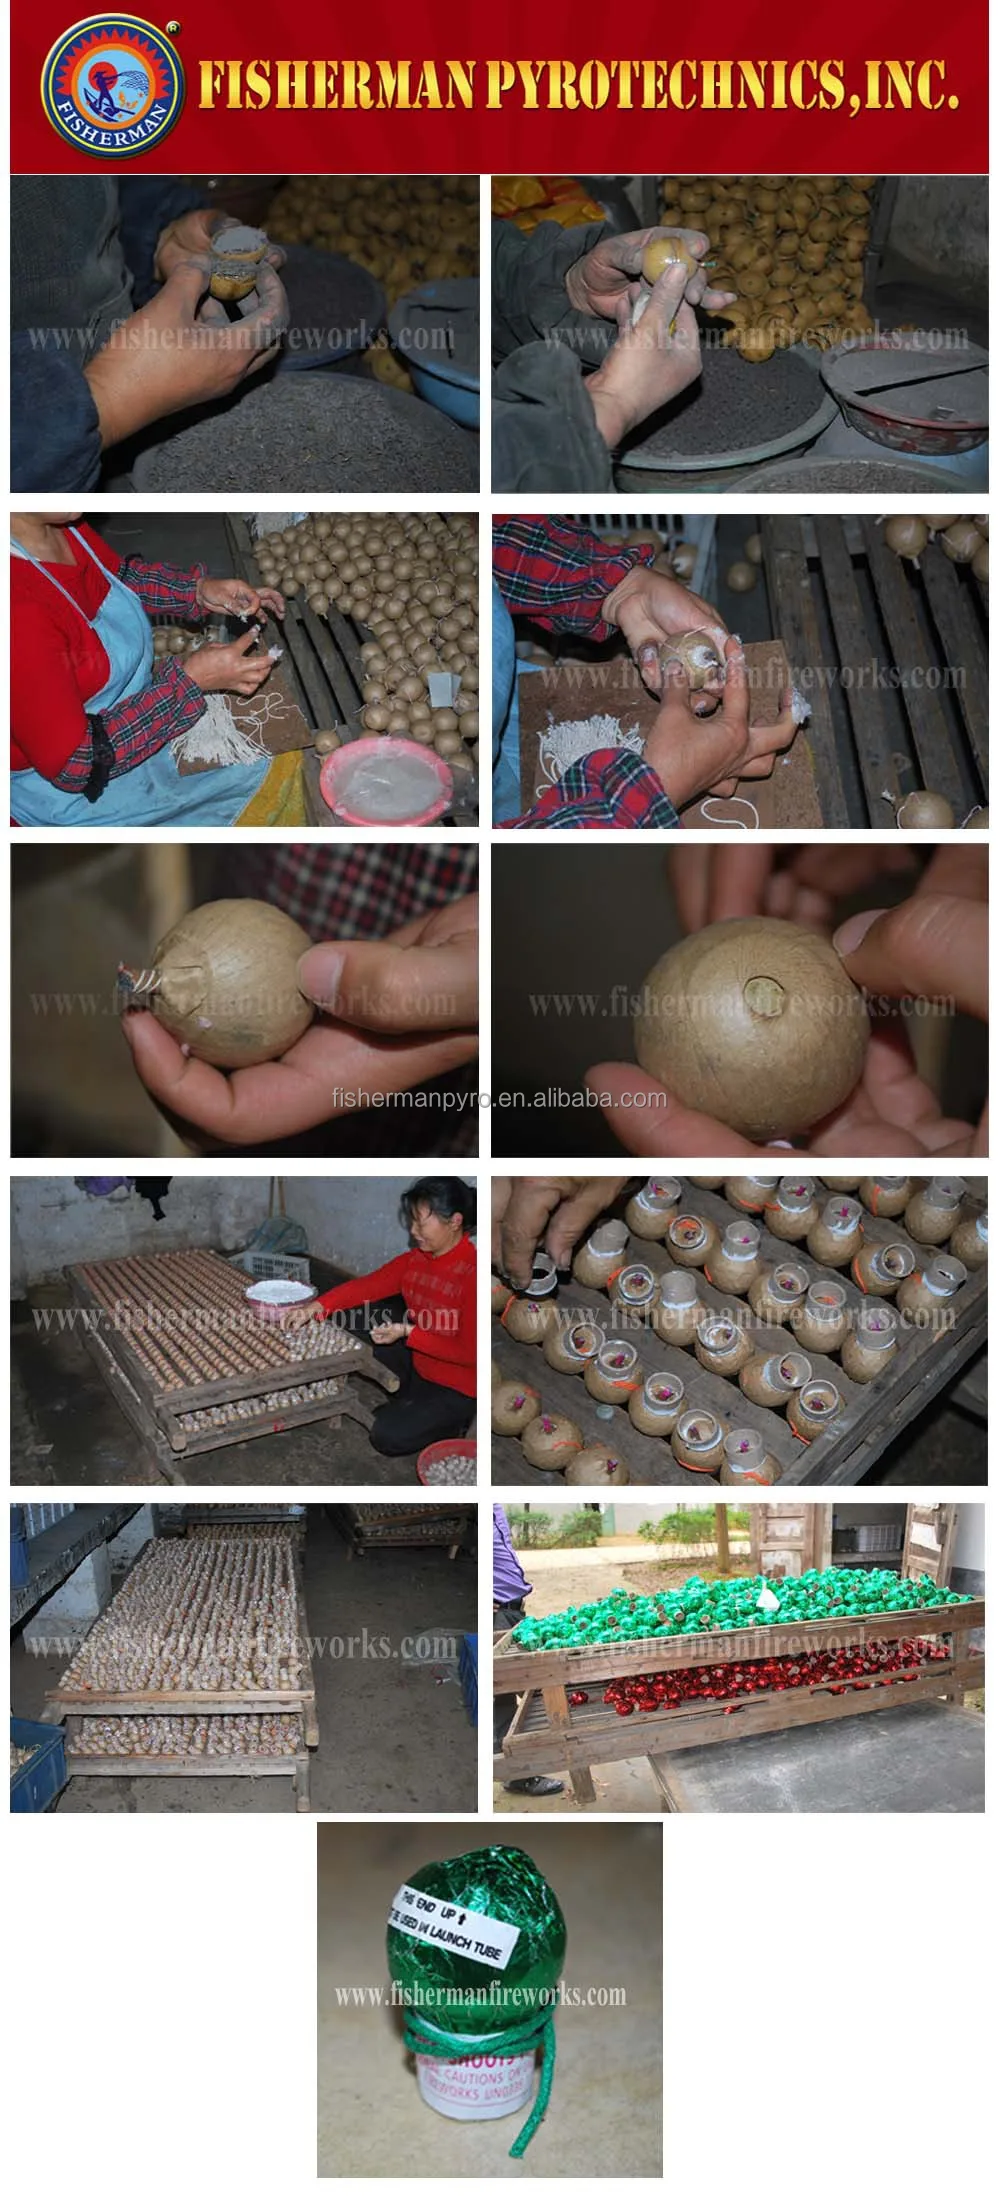 BF6302-B SHELL SHOCK! RELOADABLES SHELLS FIREWORKS FOR WHOLESALE PRICE